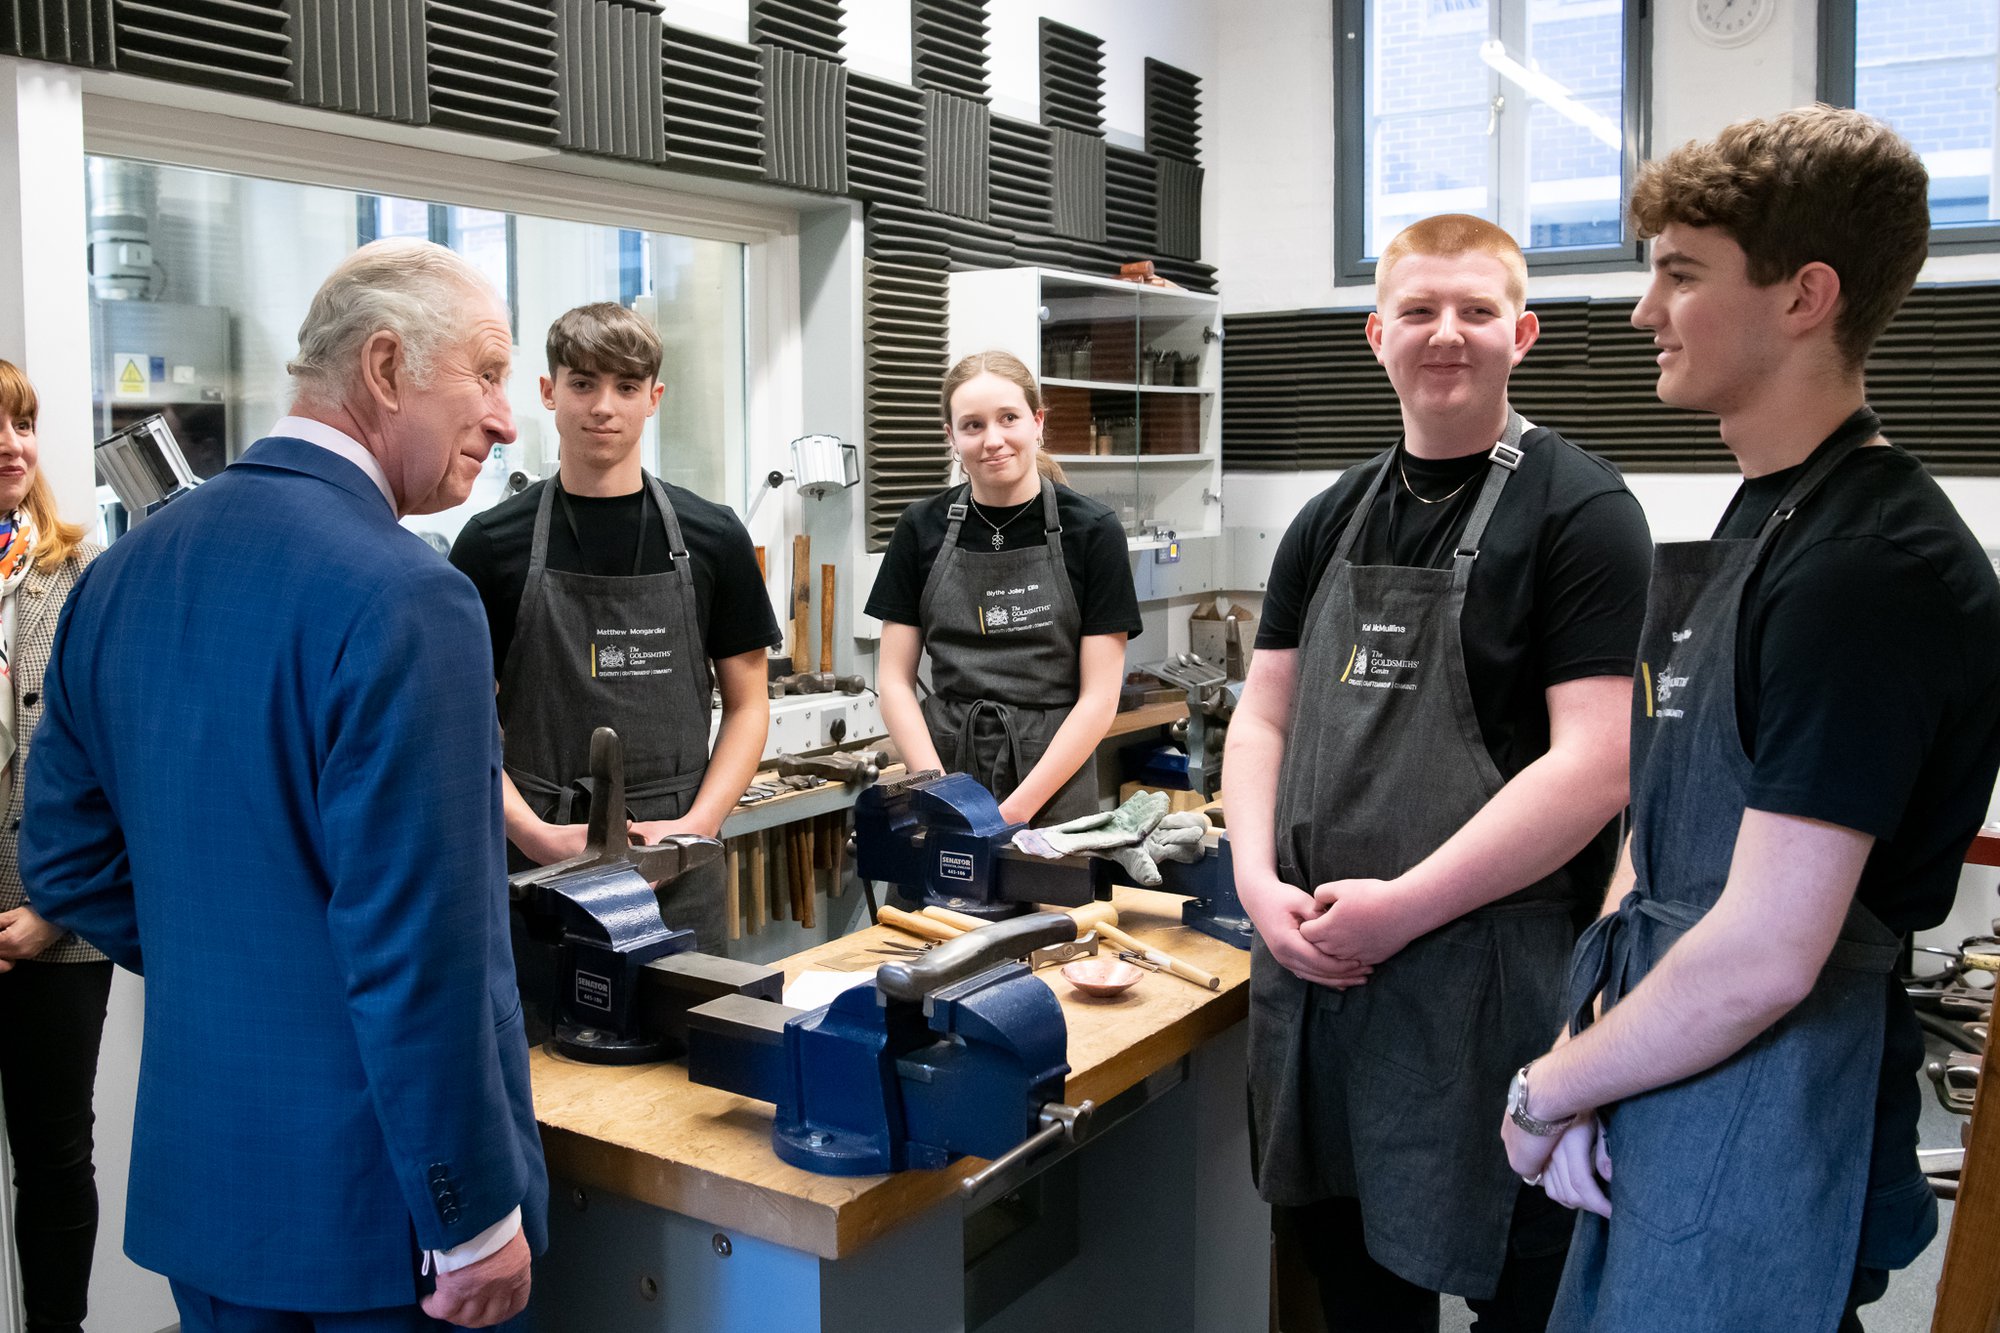 King Charles III visits the Goldsmith Centre on its 10th Anniversary